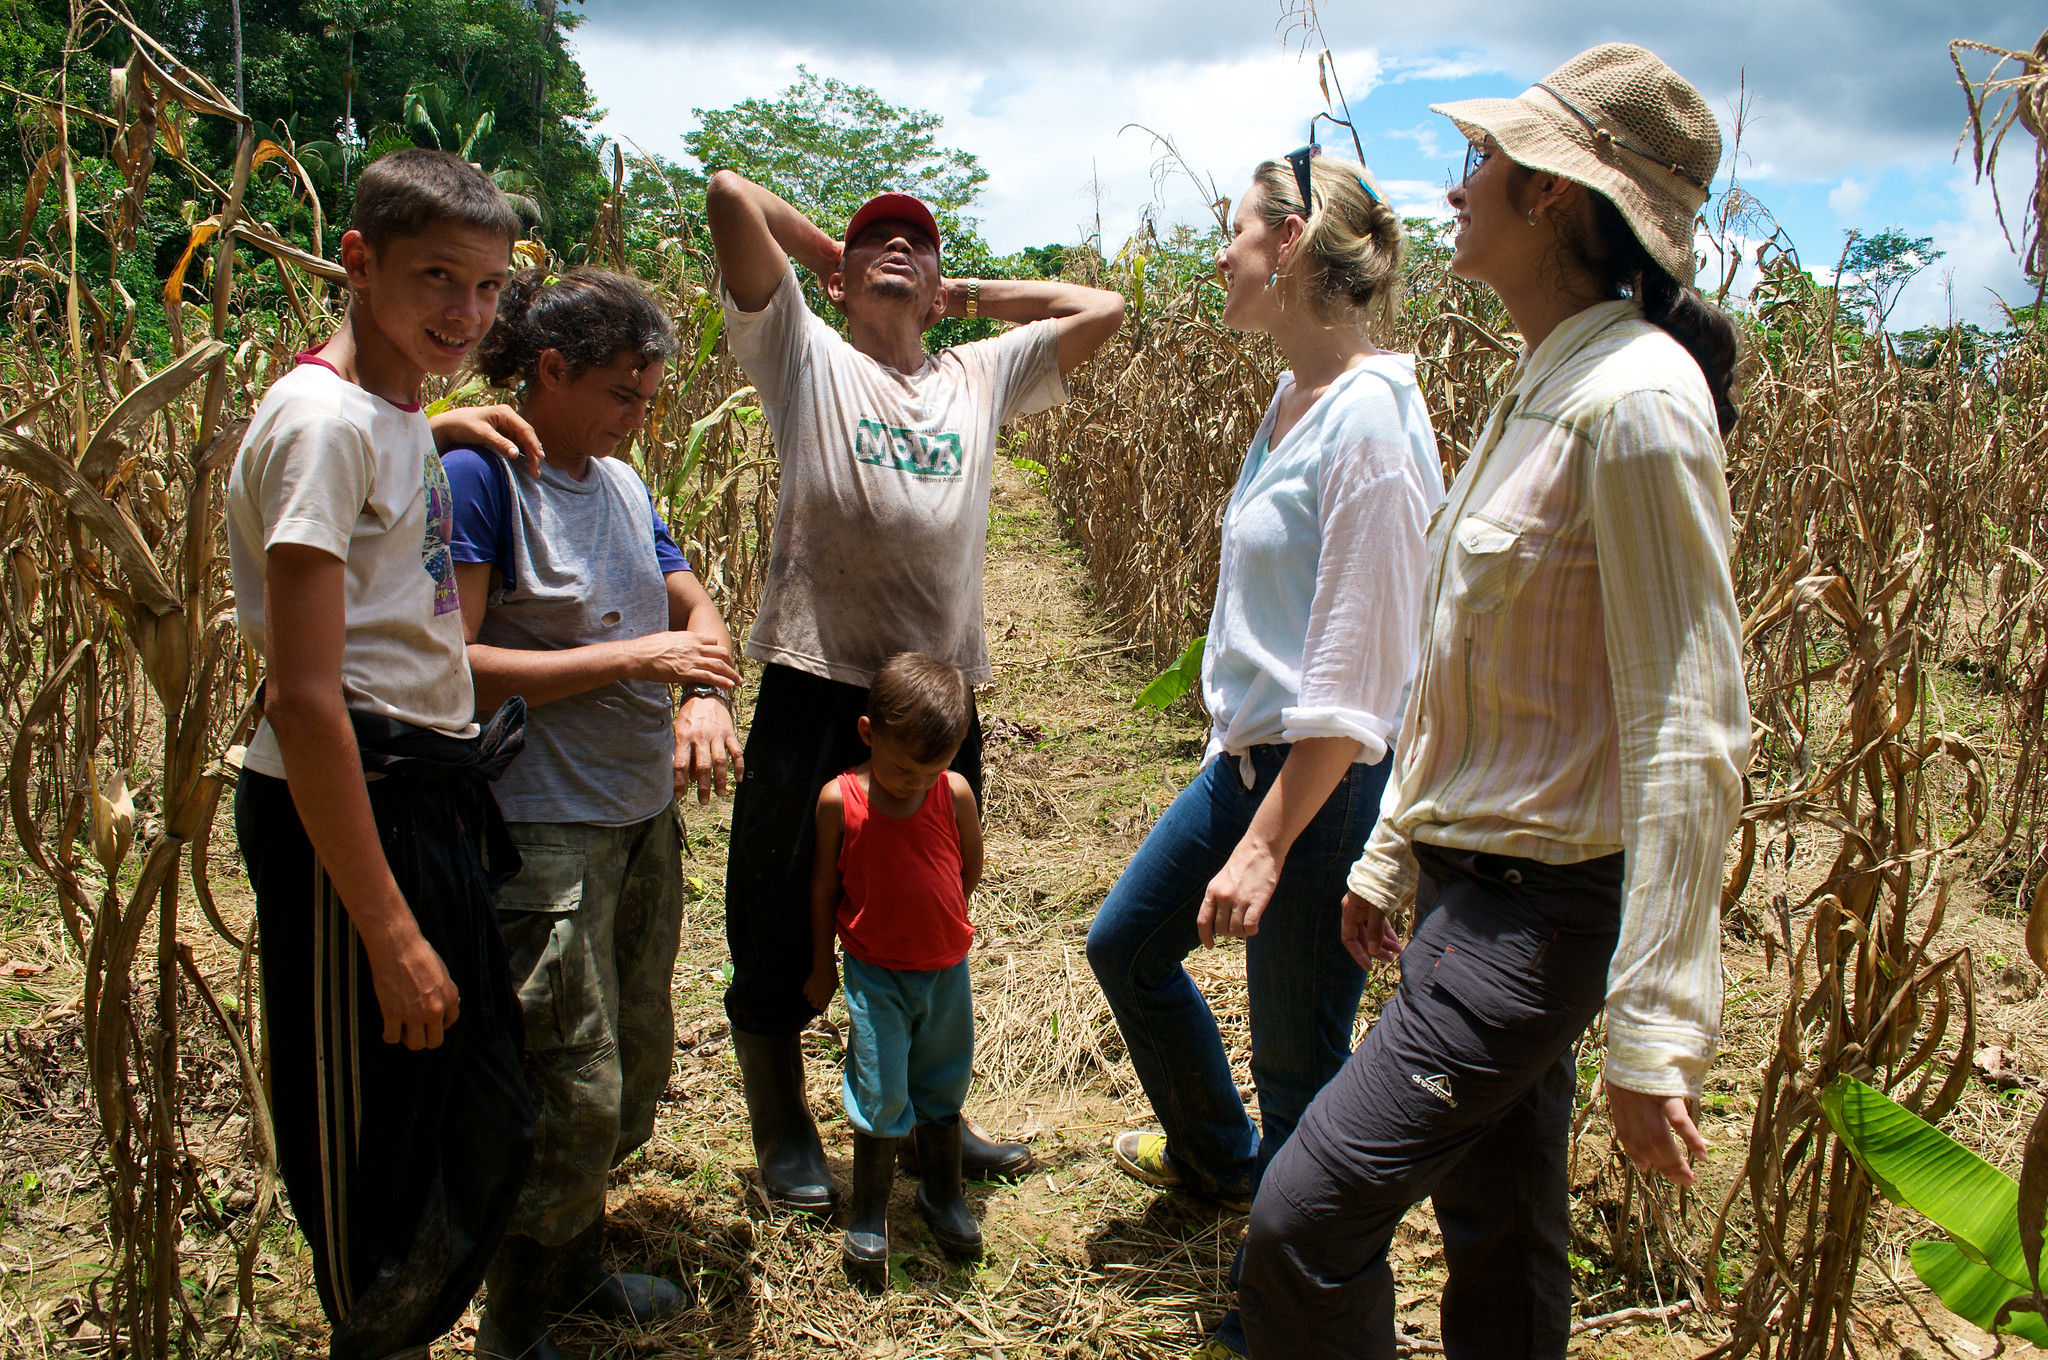 Ethnographer with workers in a field.